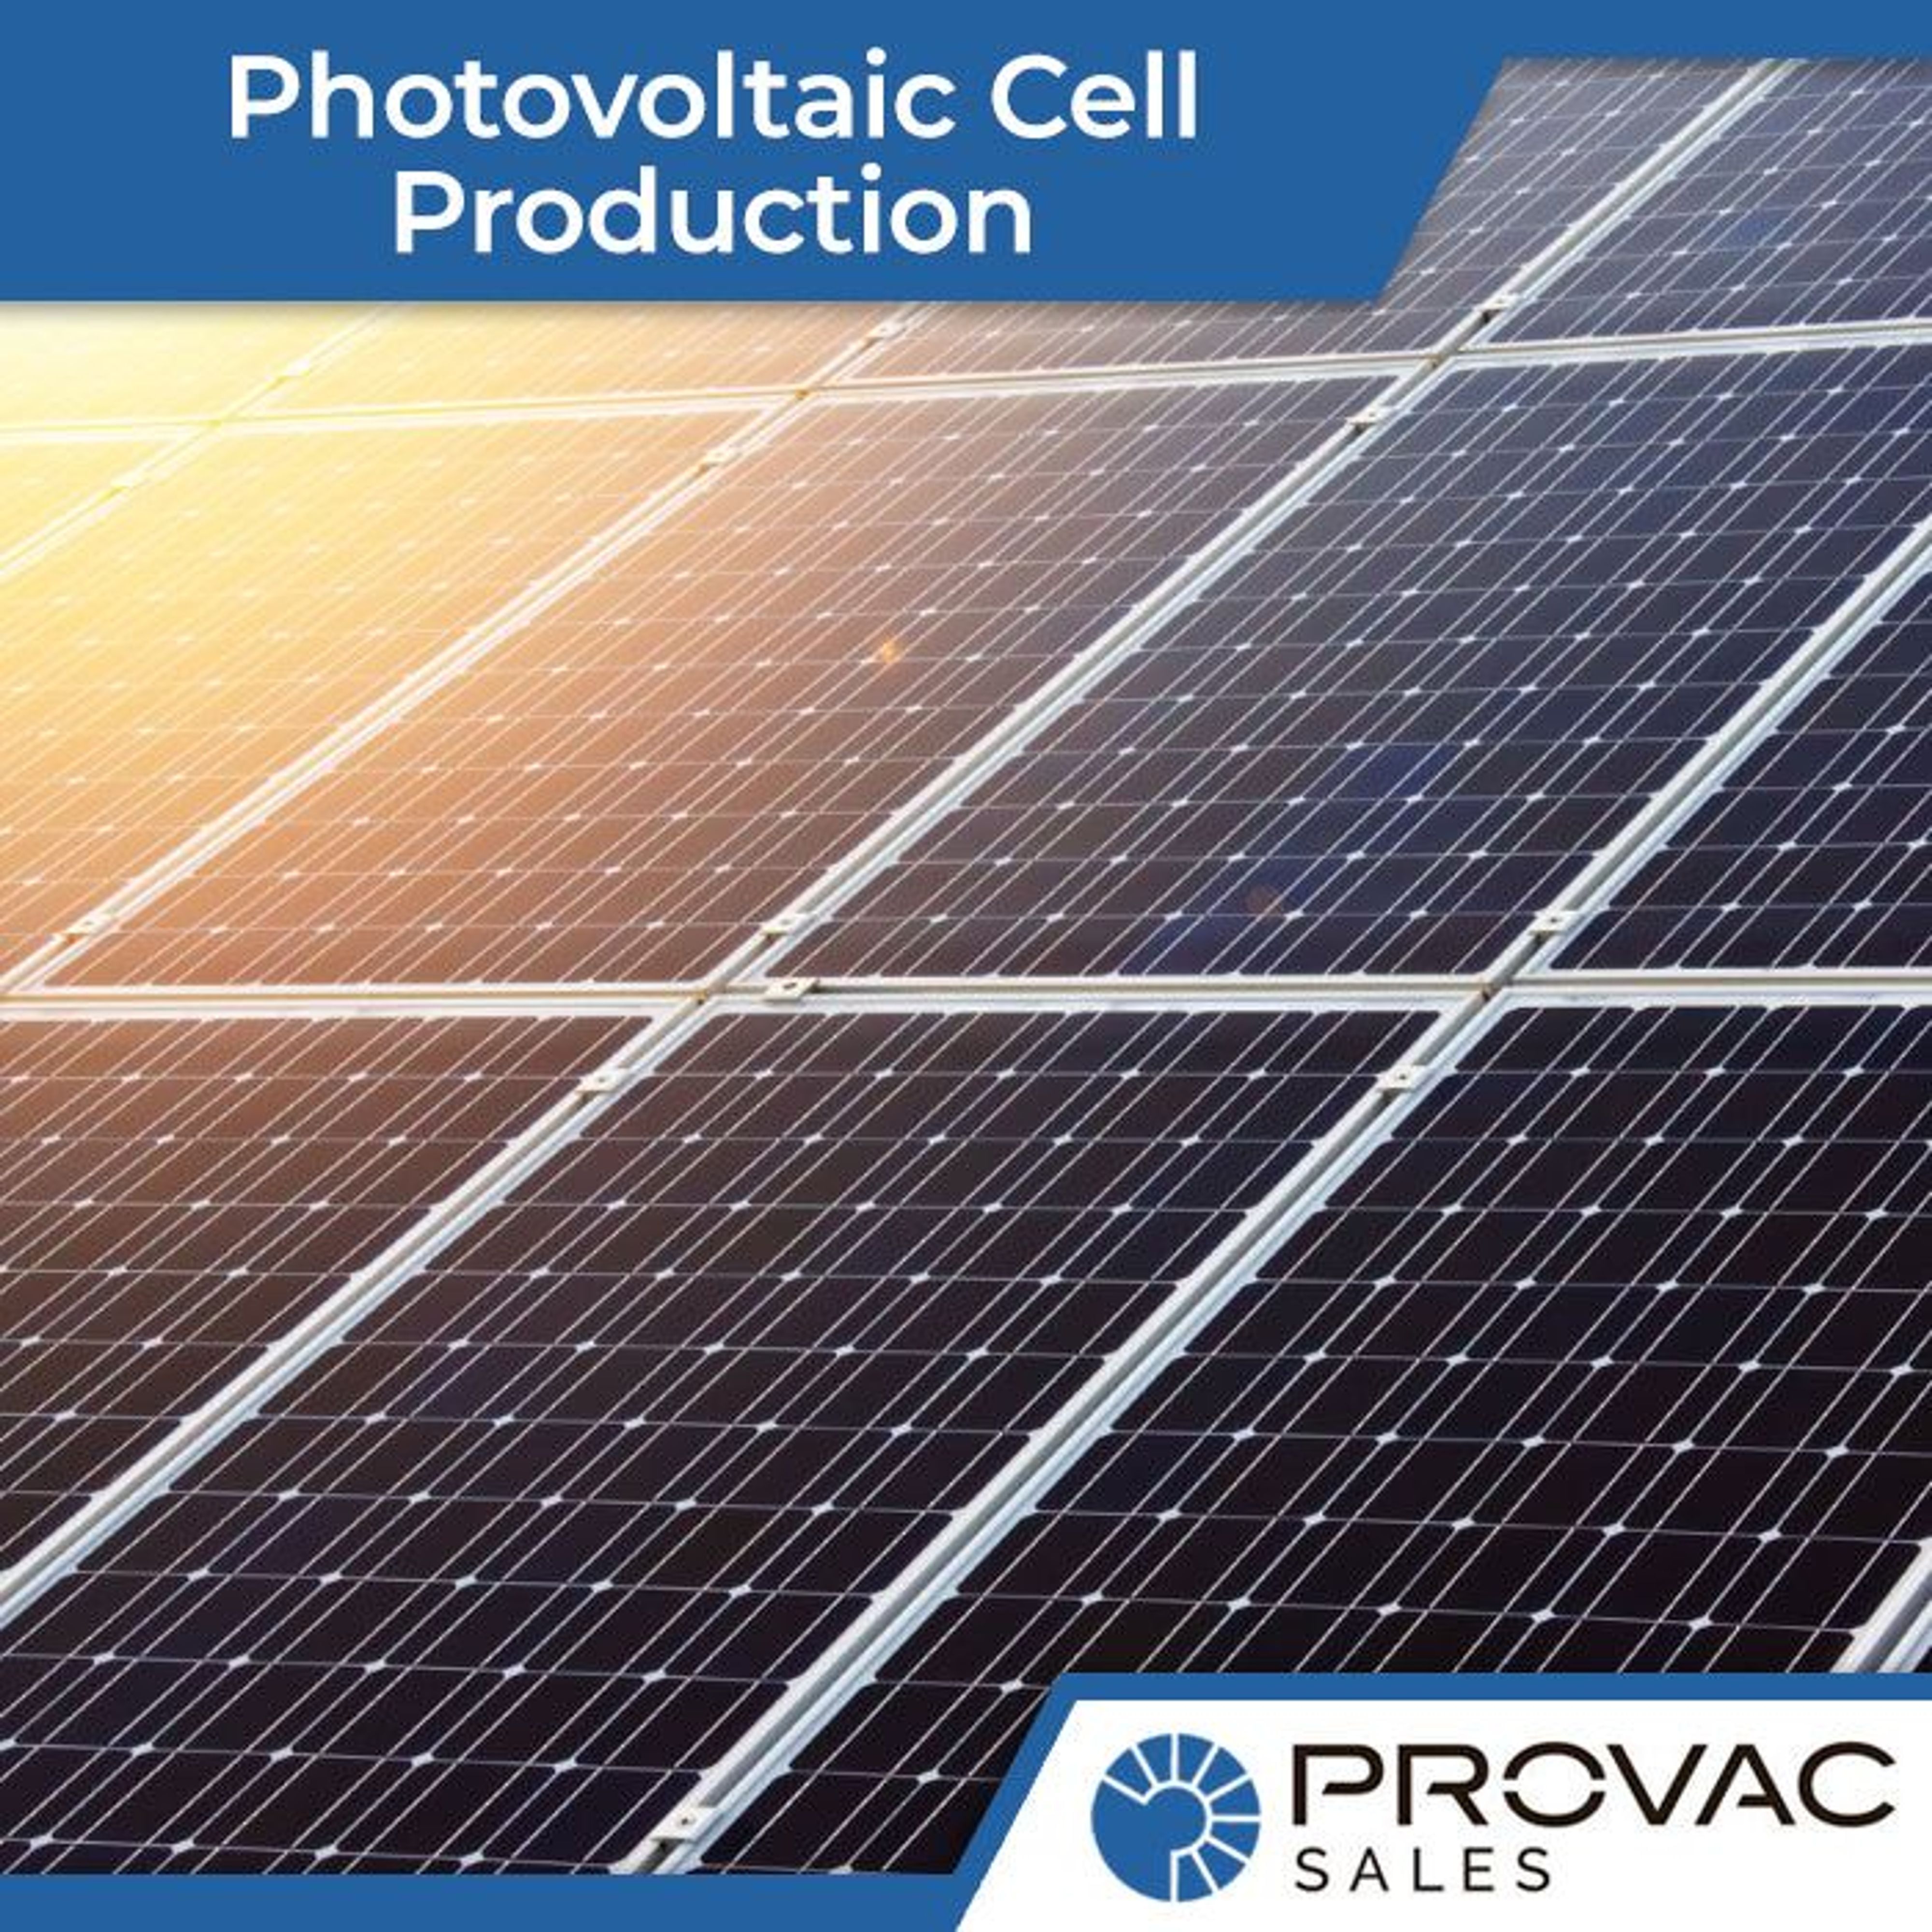 The Use of Vacuum Pumps in Photovoltaic Cell Production Background